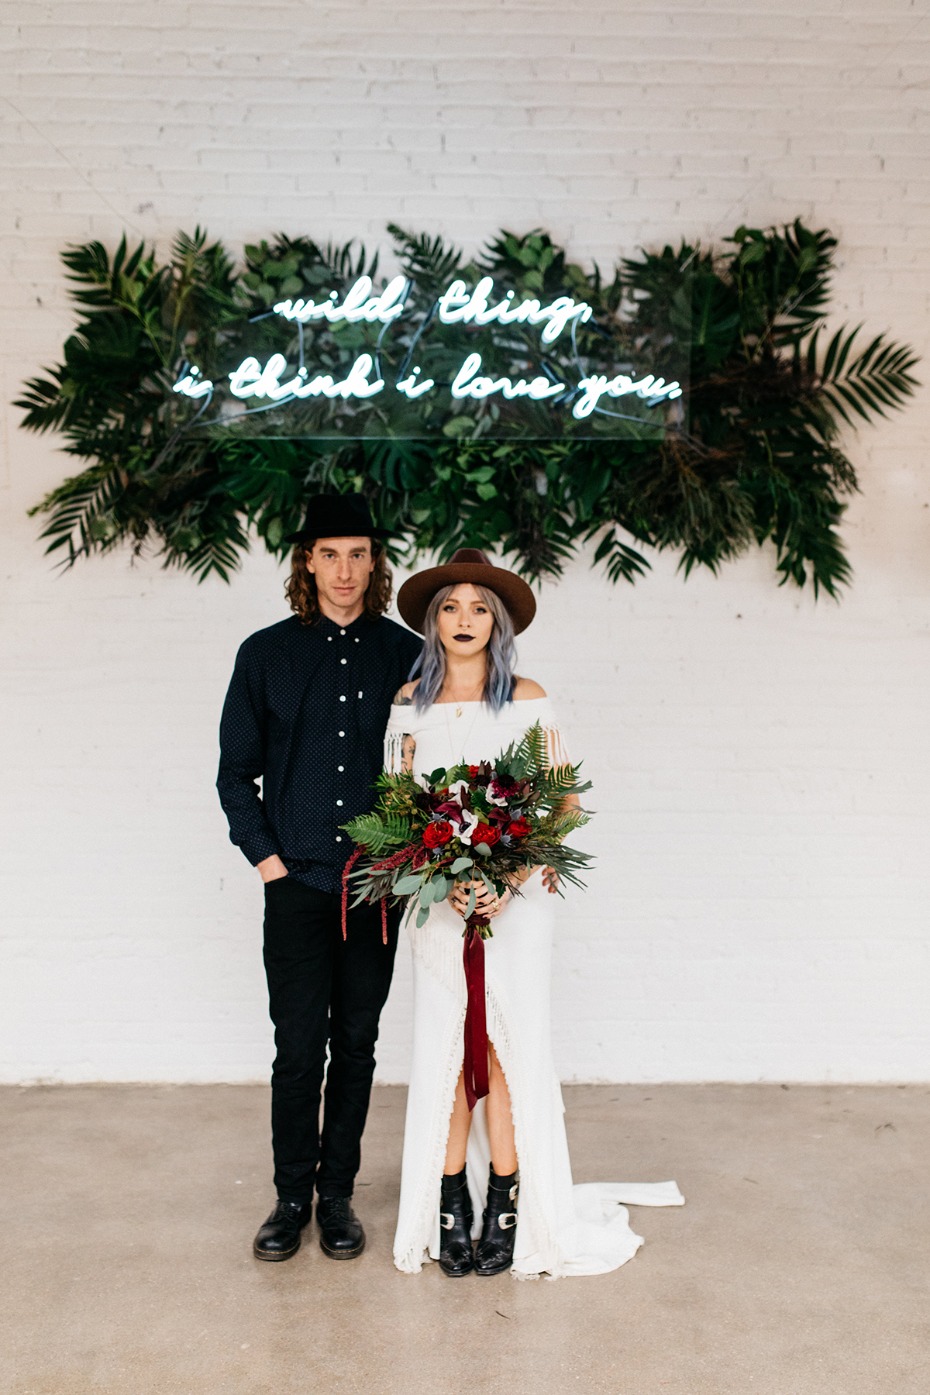 Edgy glam wedding ideas to steal right now